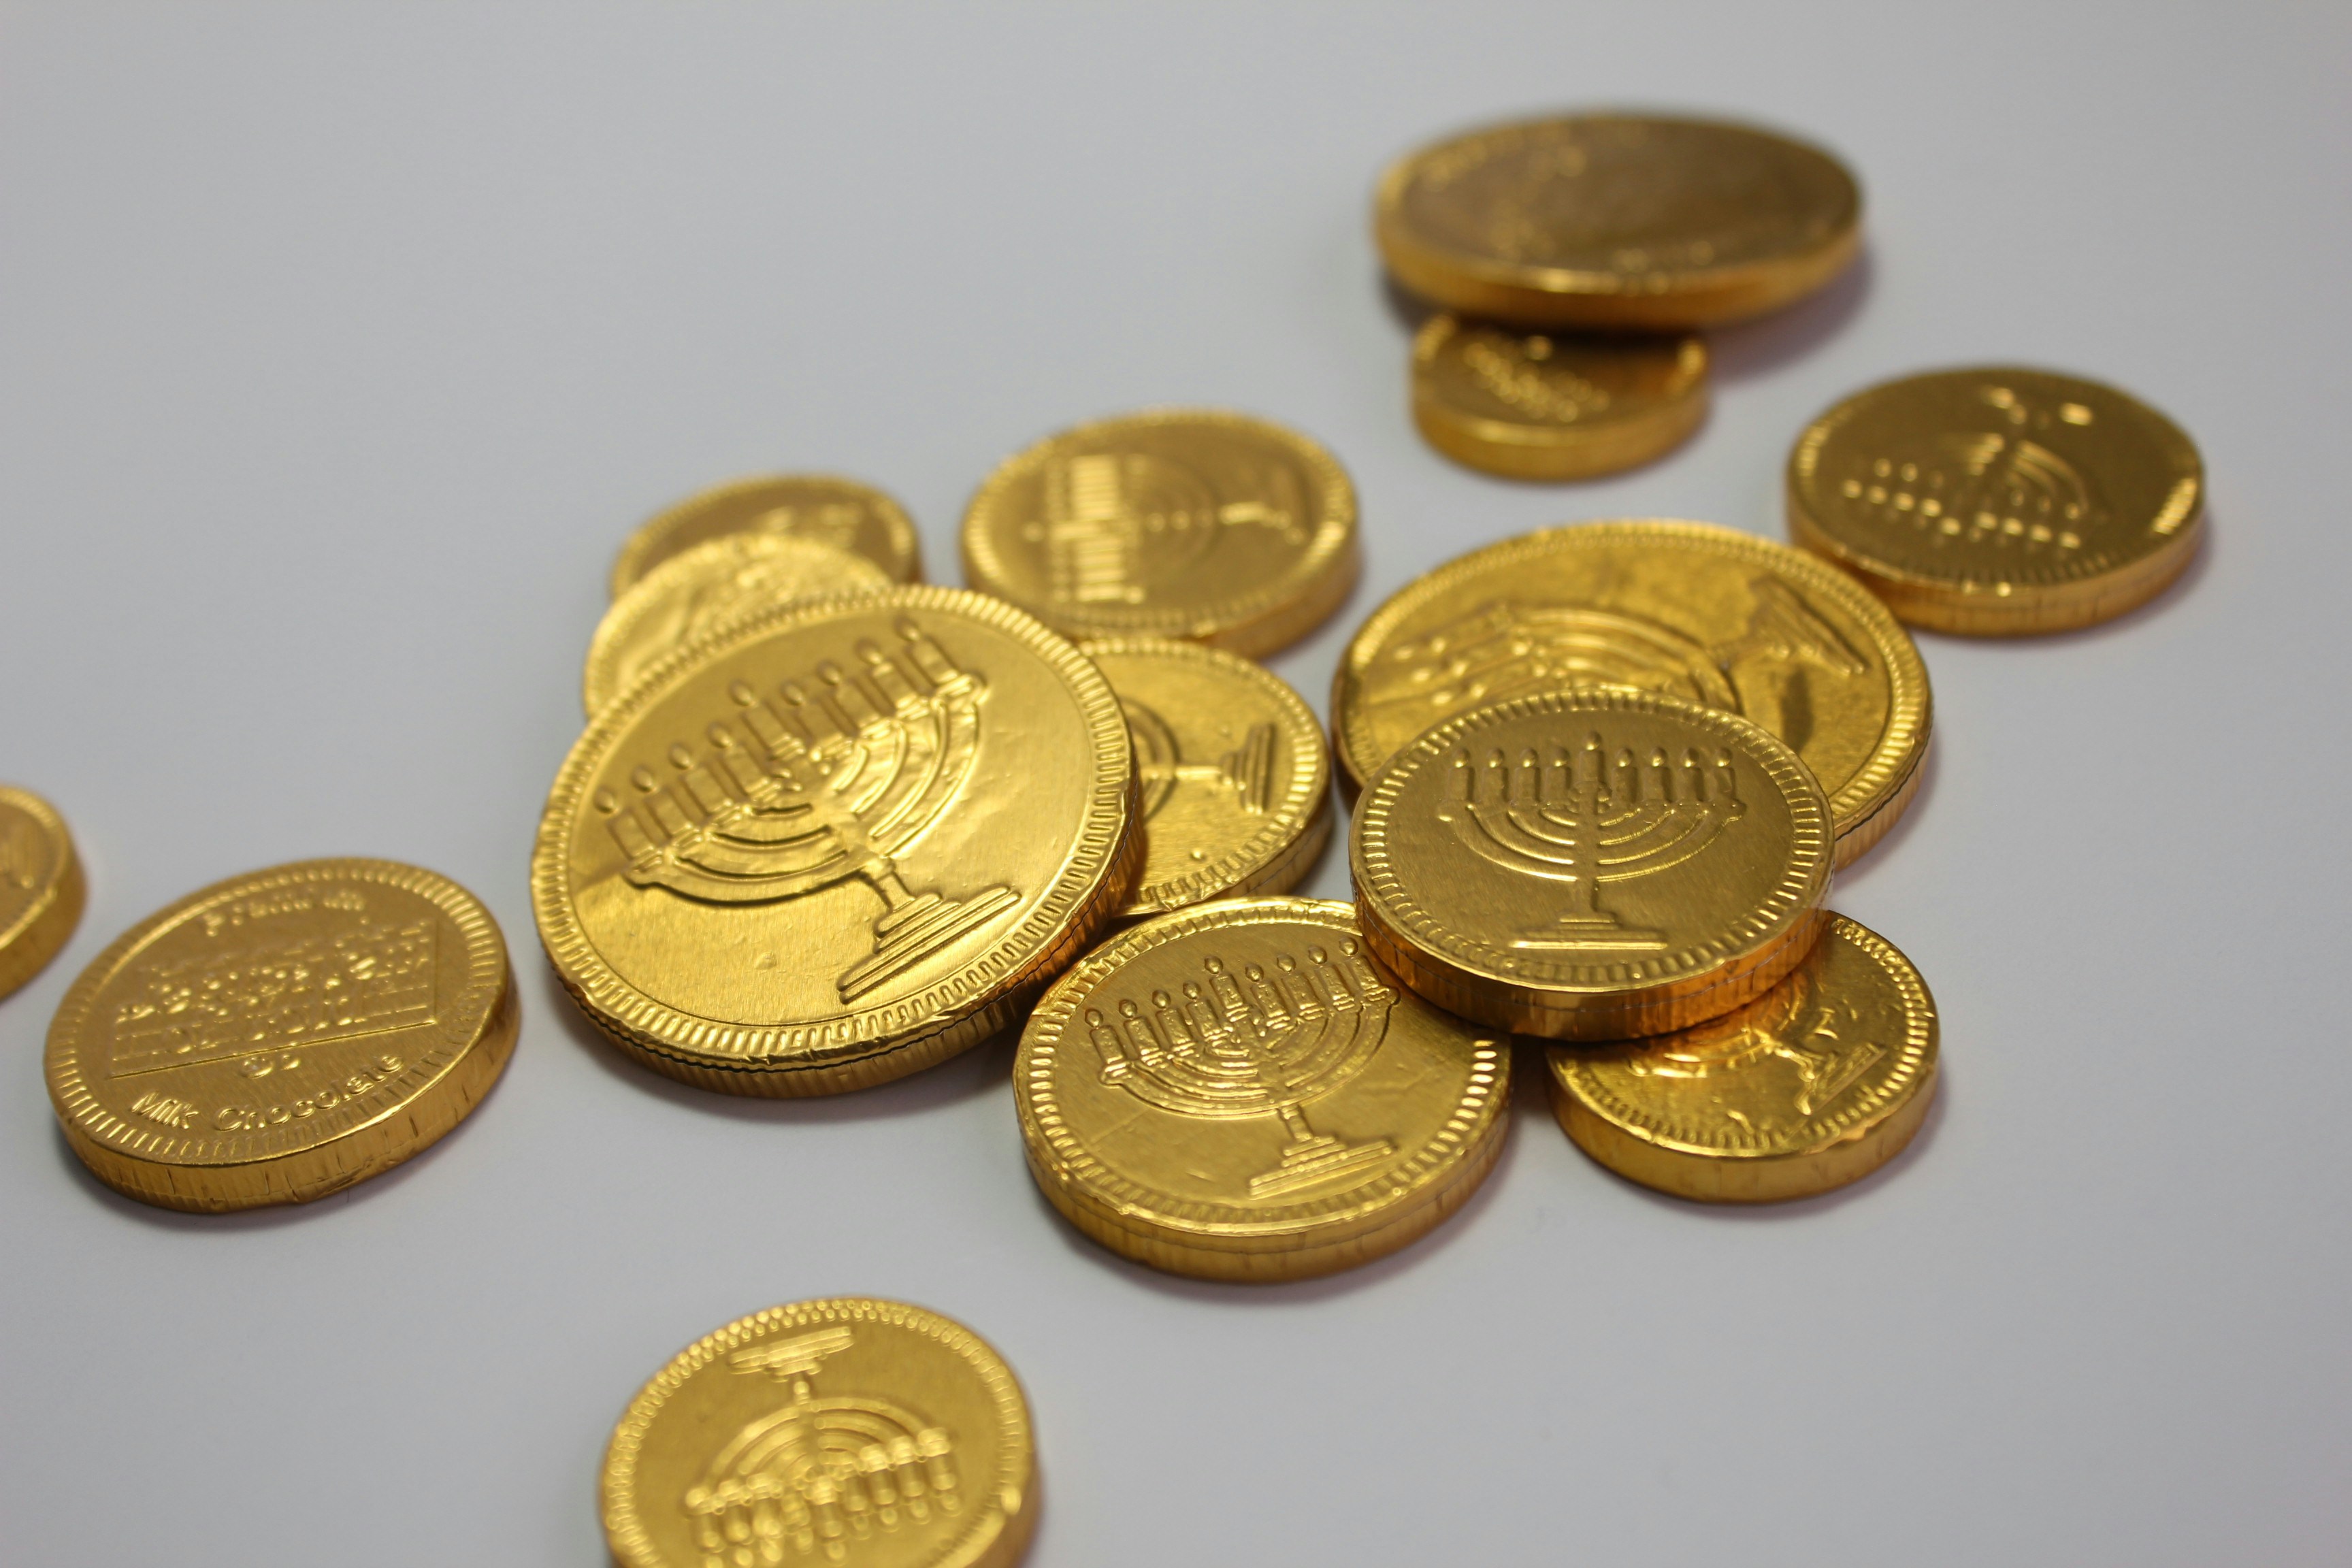 Festive Chanukah Gelt Chocolate Coins On White Background To Celebrate The Holiday Season